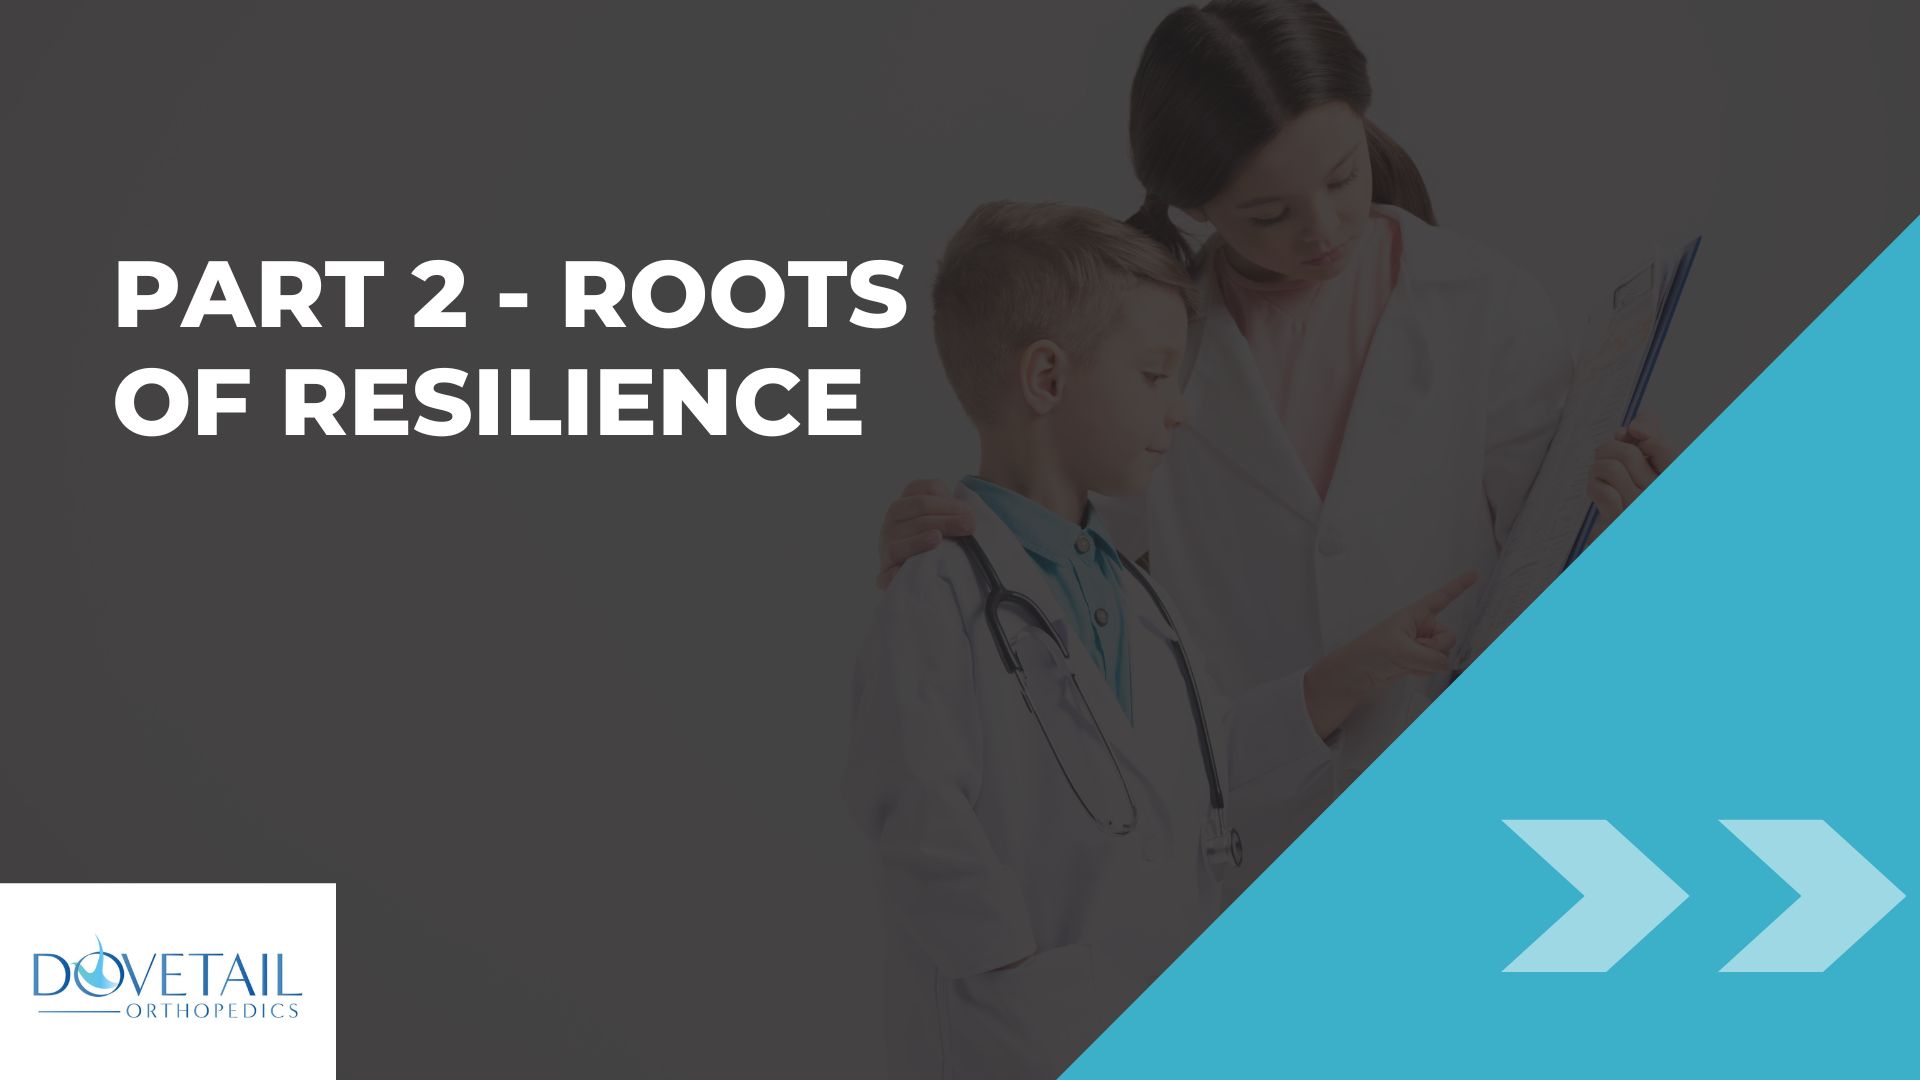 The slide is titled "Part 2 - Roots of Resilience" and features a logo for Dovetail Orthopedics in the lower left corner. On the left side of the slide, there is a photograph of two individuals wearing white coats, one of whom is a young boy, seemingly in a doctor's coat, listening to the heartbeat of a toy with a stethoscope, and the other is a female doctor or medical professional looking at papers on a clipboard. The right side of the slide is dominated by a large teal-colored diagonal stripe that adds a dynamic element to the design. The overall design suggests a professional medical or healthcare-related theme, focusing on resilience, possibly in a pedagogical or patient care context.